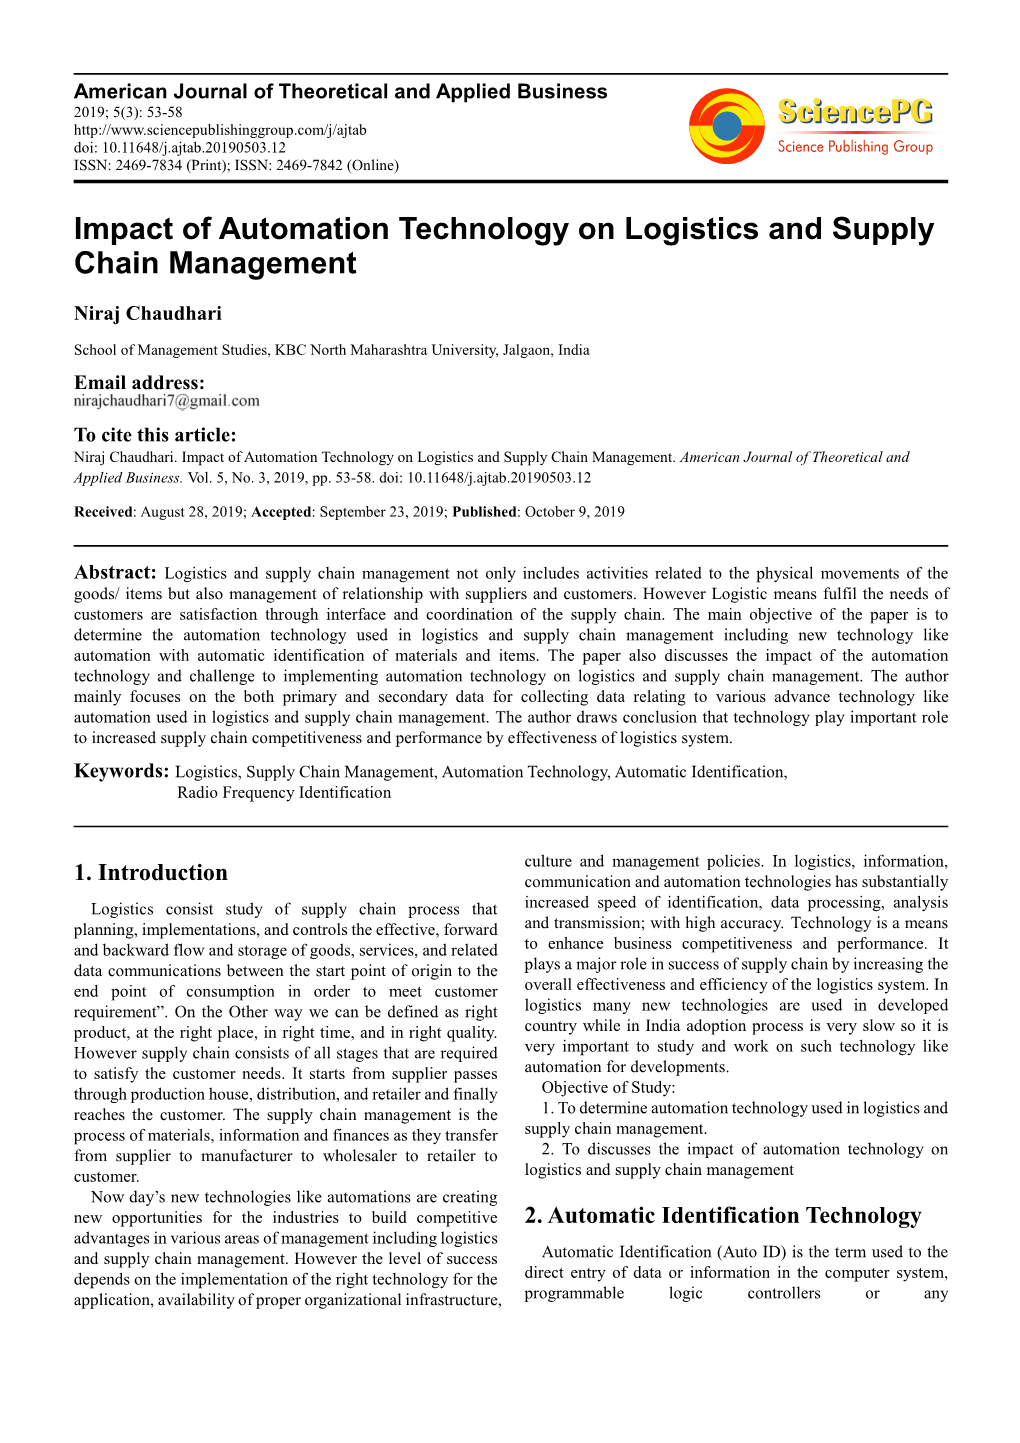 Impact of Automation Technology on Logistics and Supply Chain Management